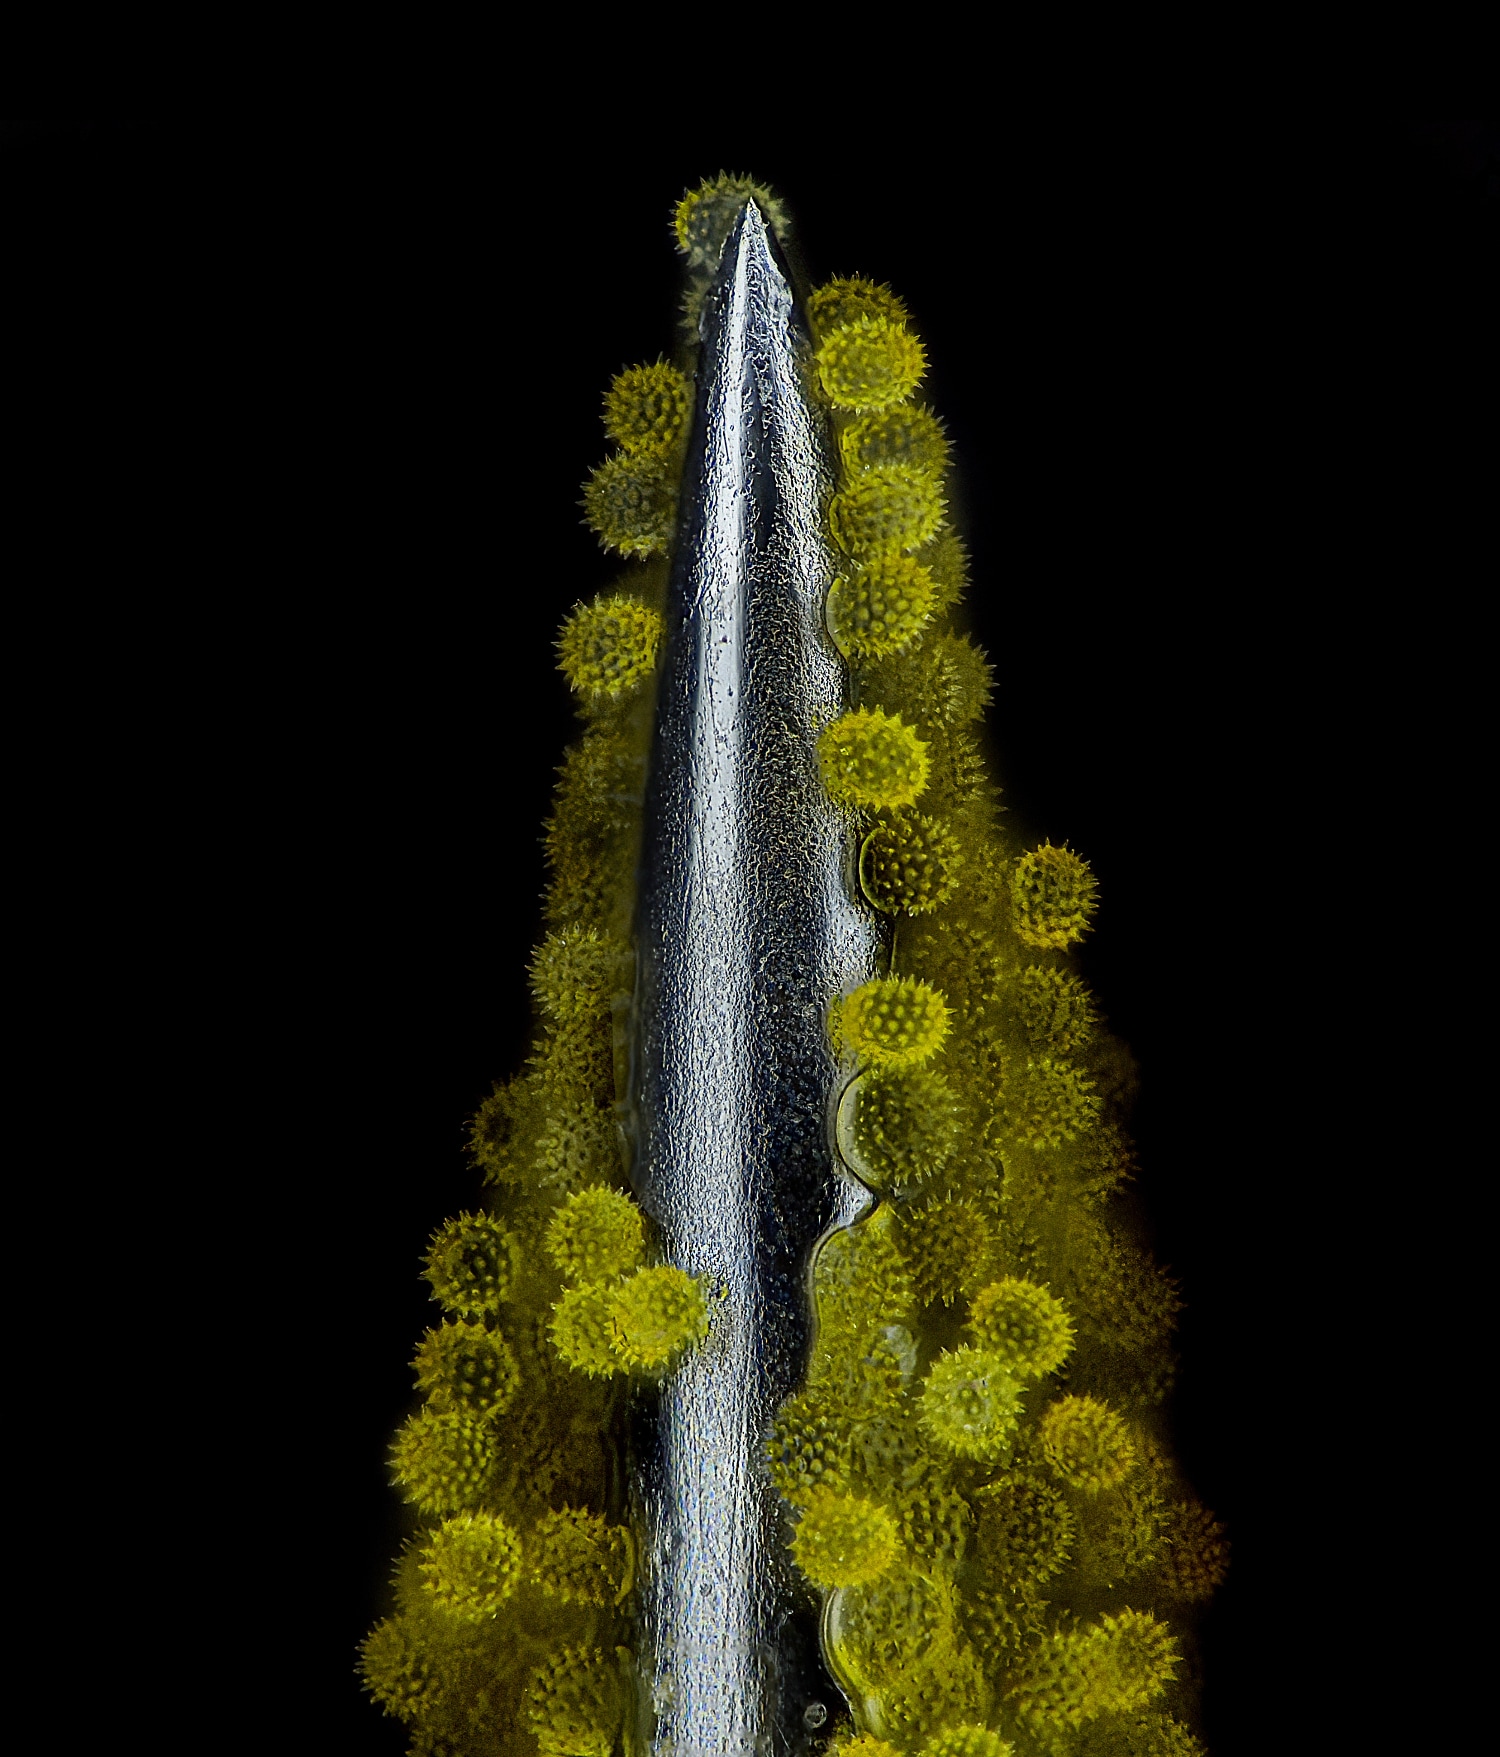 An image of sunflower pollen clinging to the point of a needle.